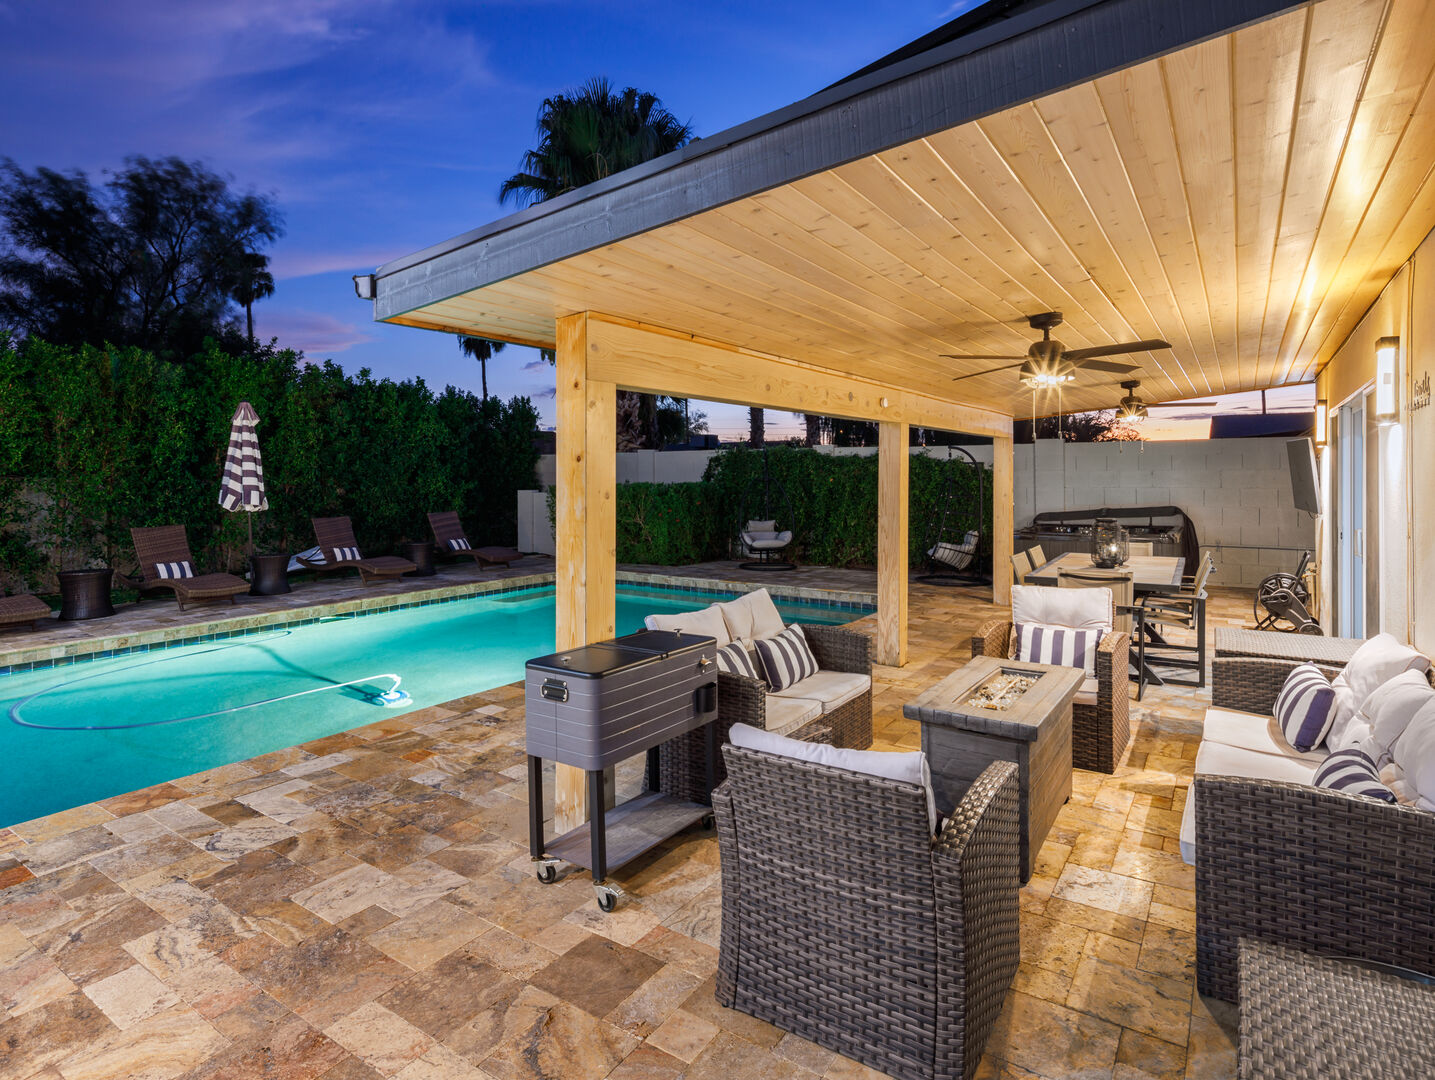 Large covered patio with fire pit, BBQ grill, and outdoor dining table. Overlooks pool area.